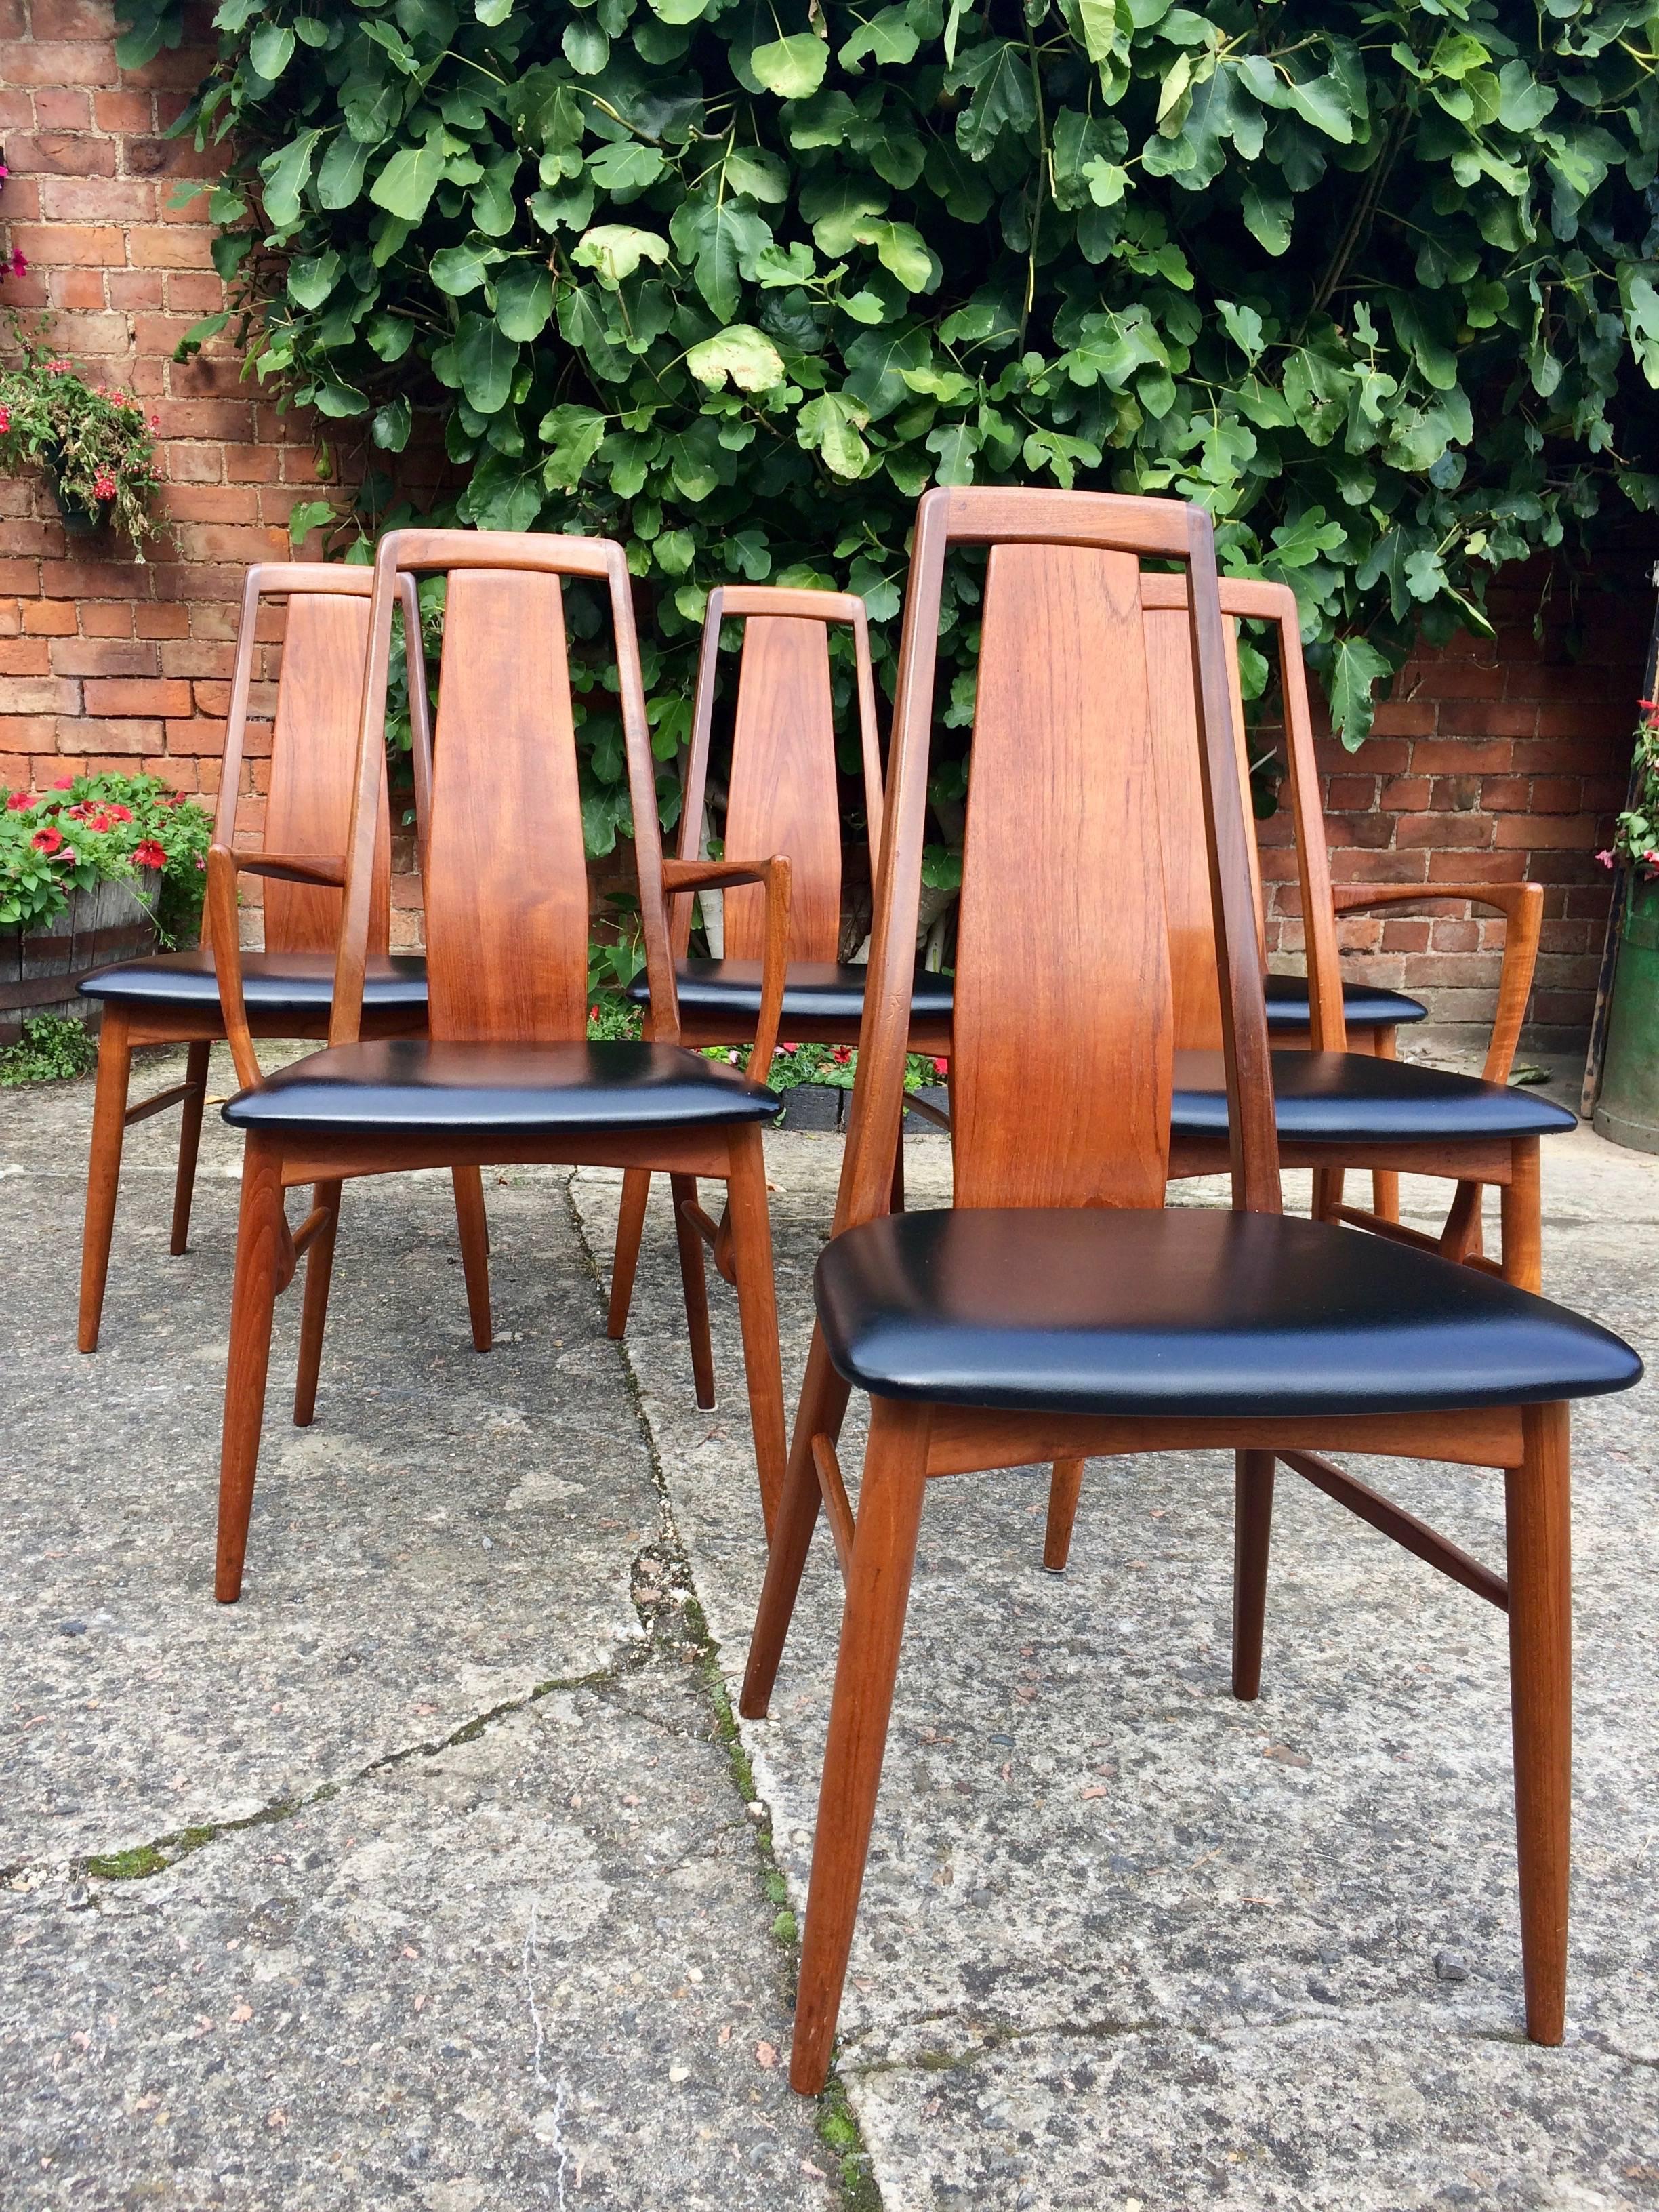 Niels Kofoed for Koefoeds Hornslet extendable solid teak dining table, circa 1960s, the table and frame made from solid teak is offered is superb condition with no visible marks, the table is extendable with two separate table leaves allowing you to